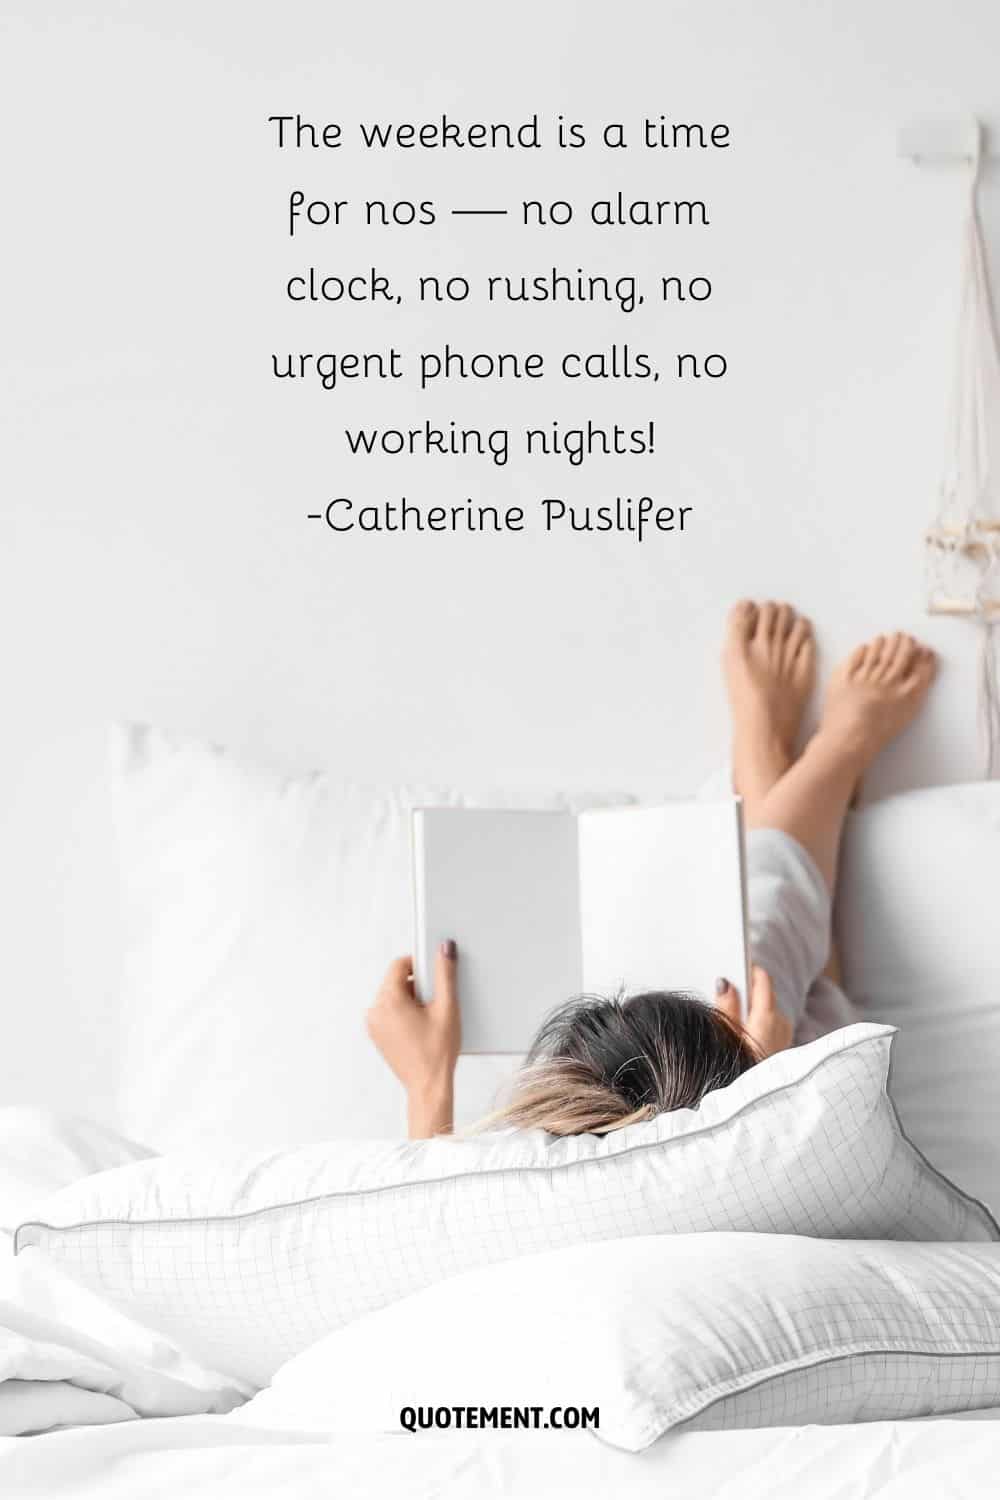 The weekend is a time for nos — no alarm clock, no rushing, no urgent phone calls, no working nights